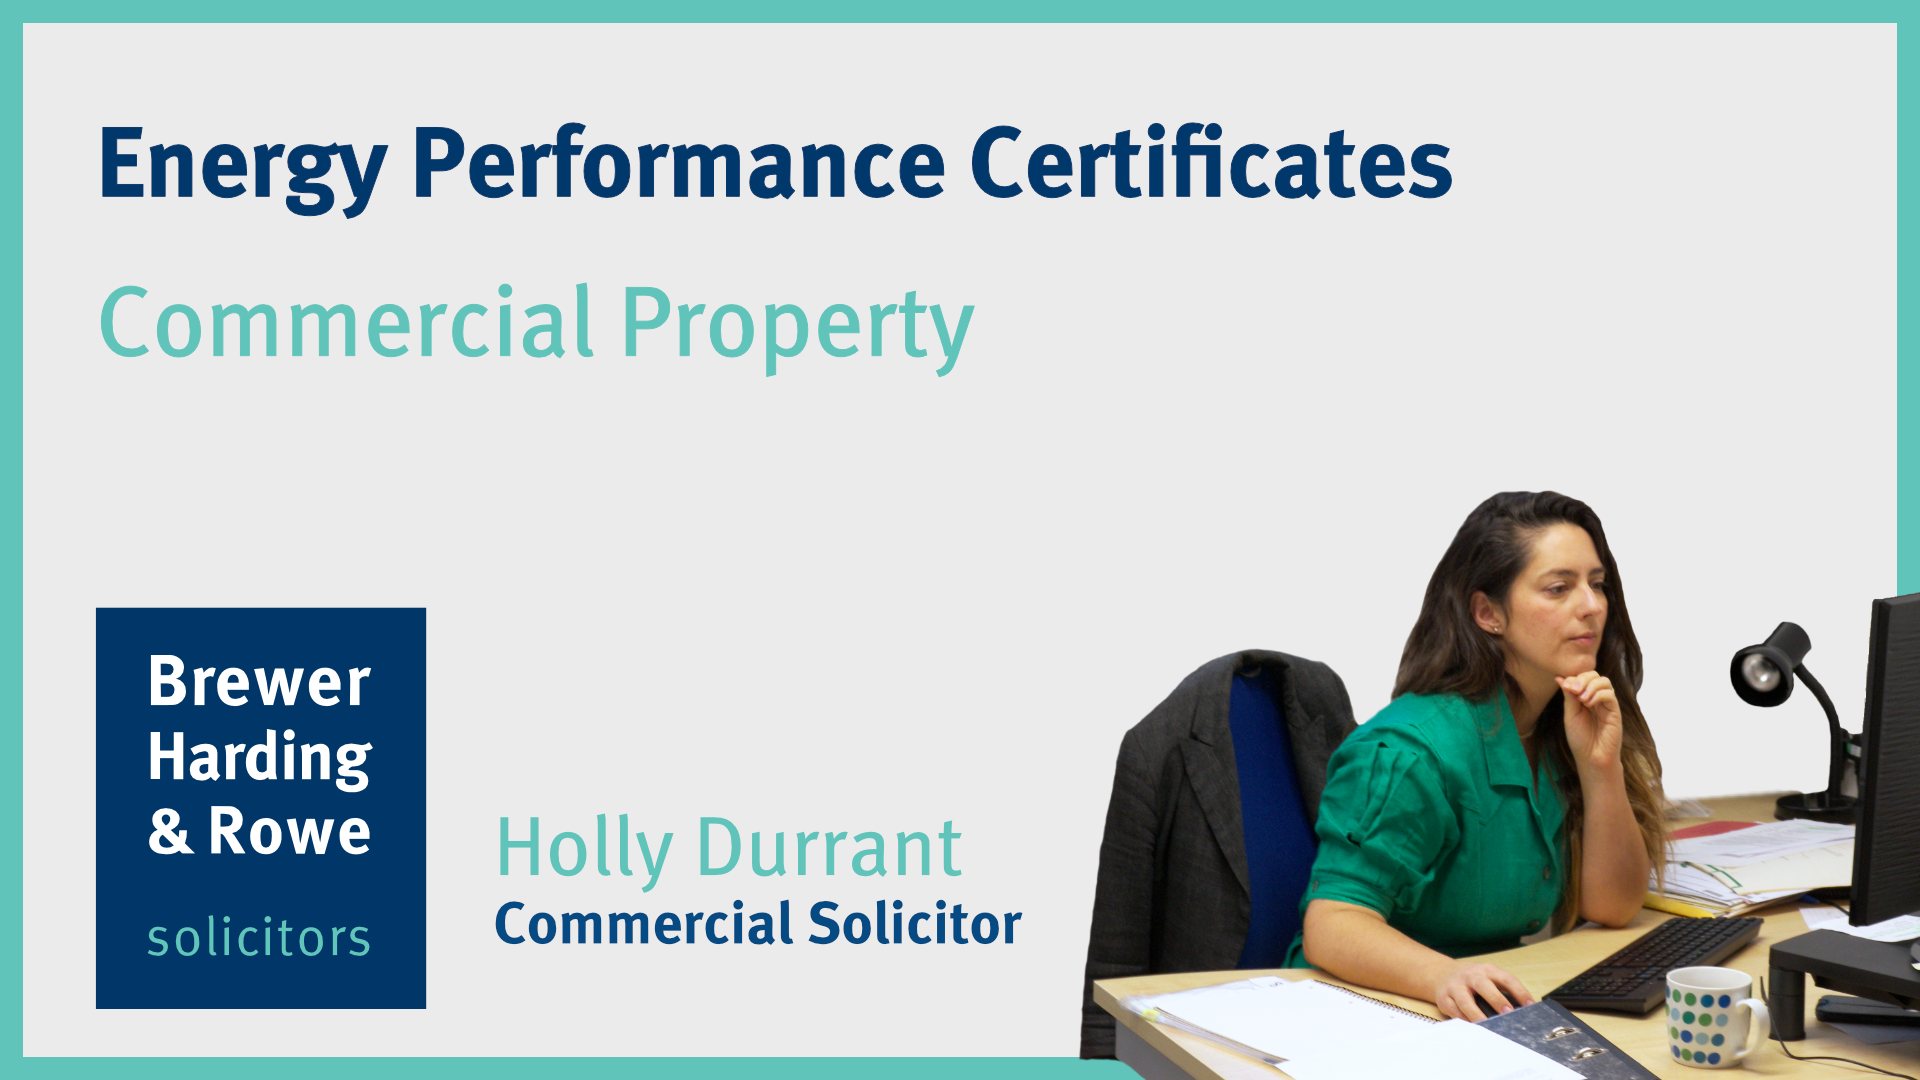 Energy Performance Certificates and Commercial Property